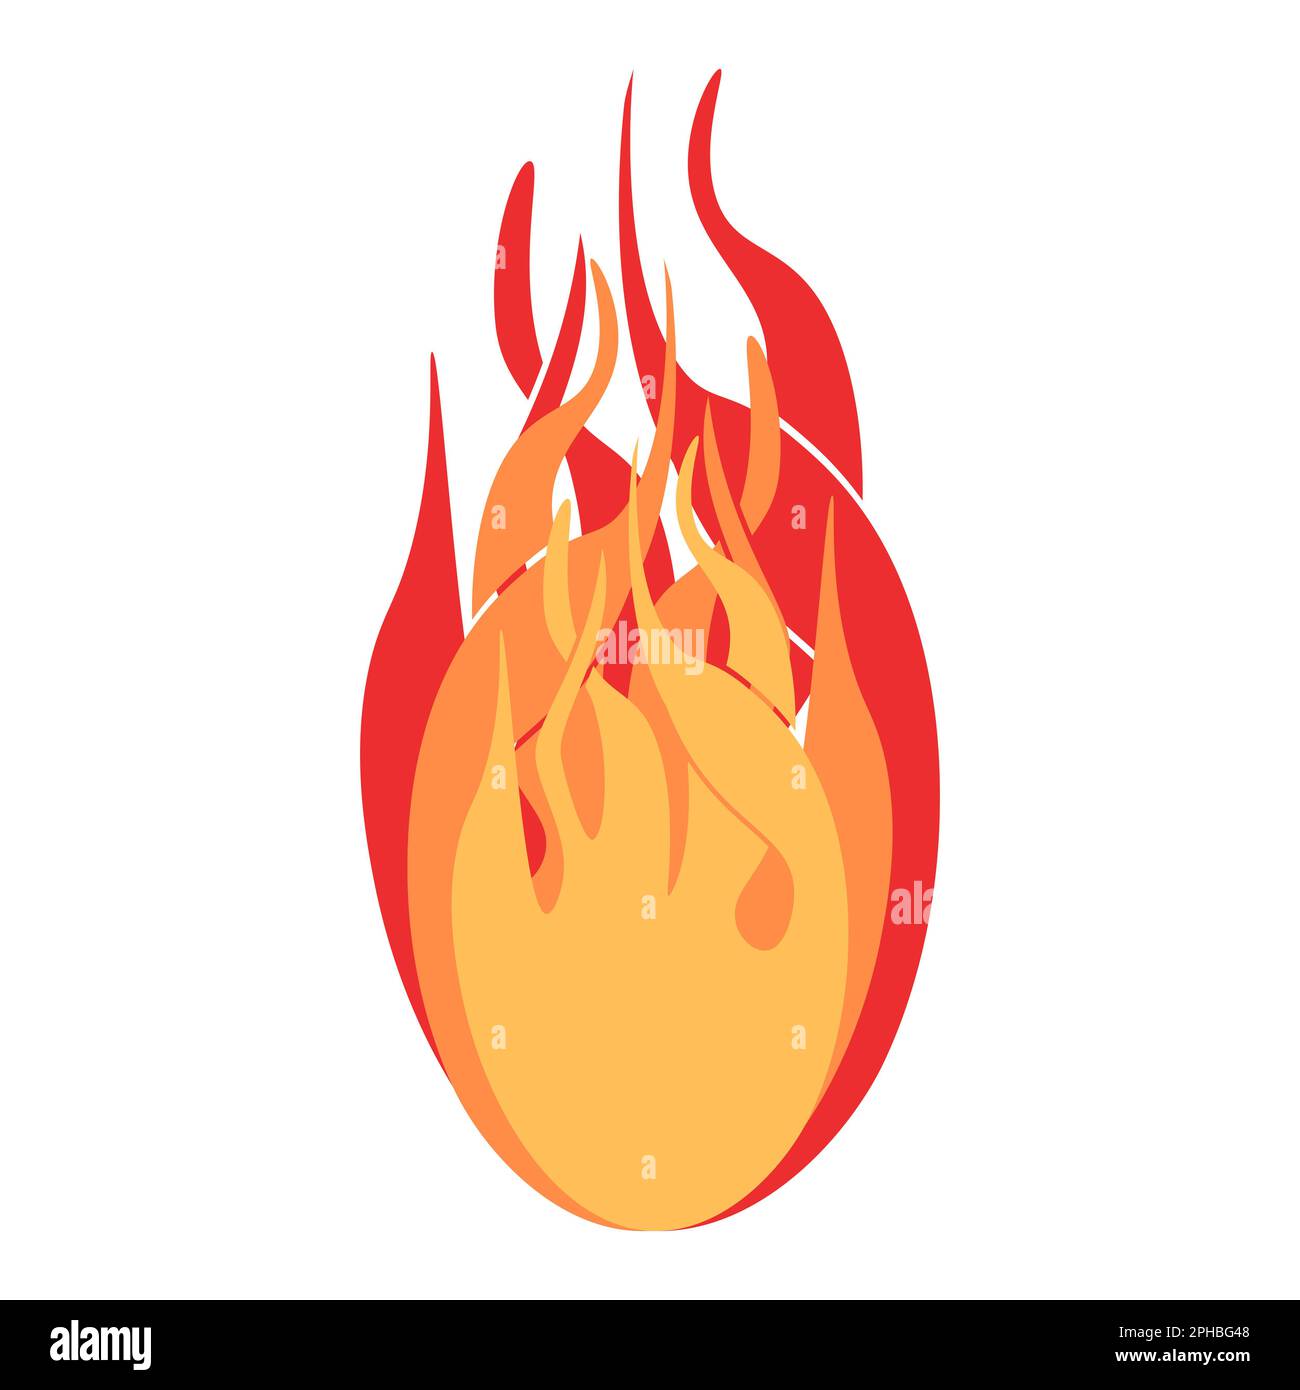 Fireball. Bright burning elements. Colorful vector illustration on a white background. Stock Vector